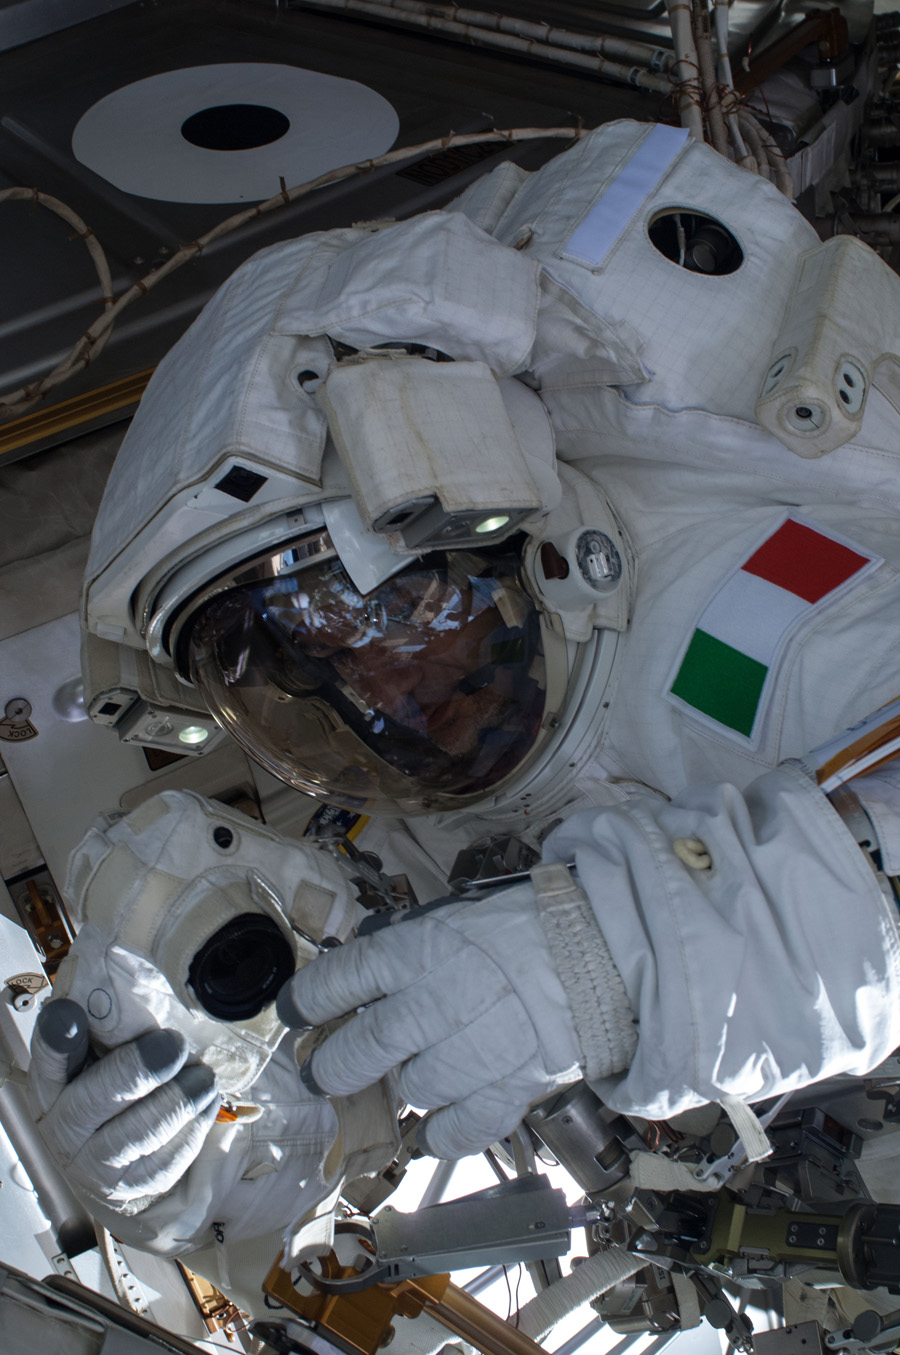 ESA astronaut Luca Parmitano works aboard the International Space Station on a spacewalk on July 16, 2013.  A little over an hour into the spacewalk, Parmitano reported that water was floating in his helmet behind his head.  Water was not an immediate health hazard for Parmitano, but Mission Control decided to end the spacewalk early.  This image was posted on July 16, 2013.